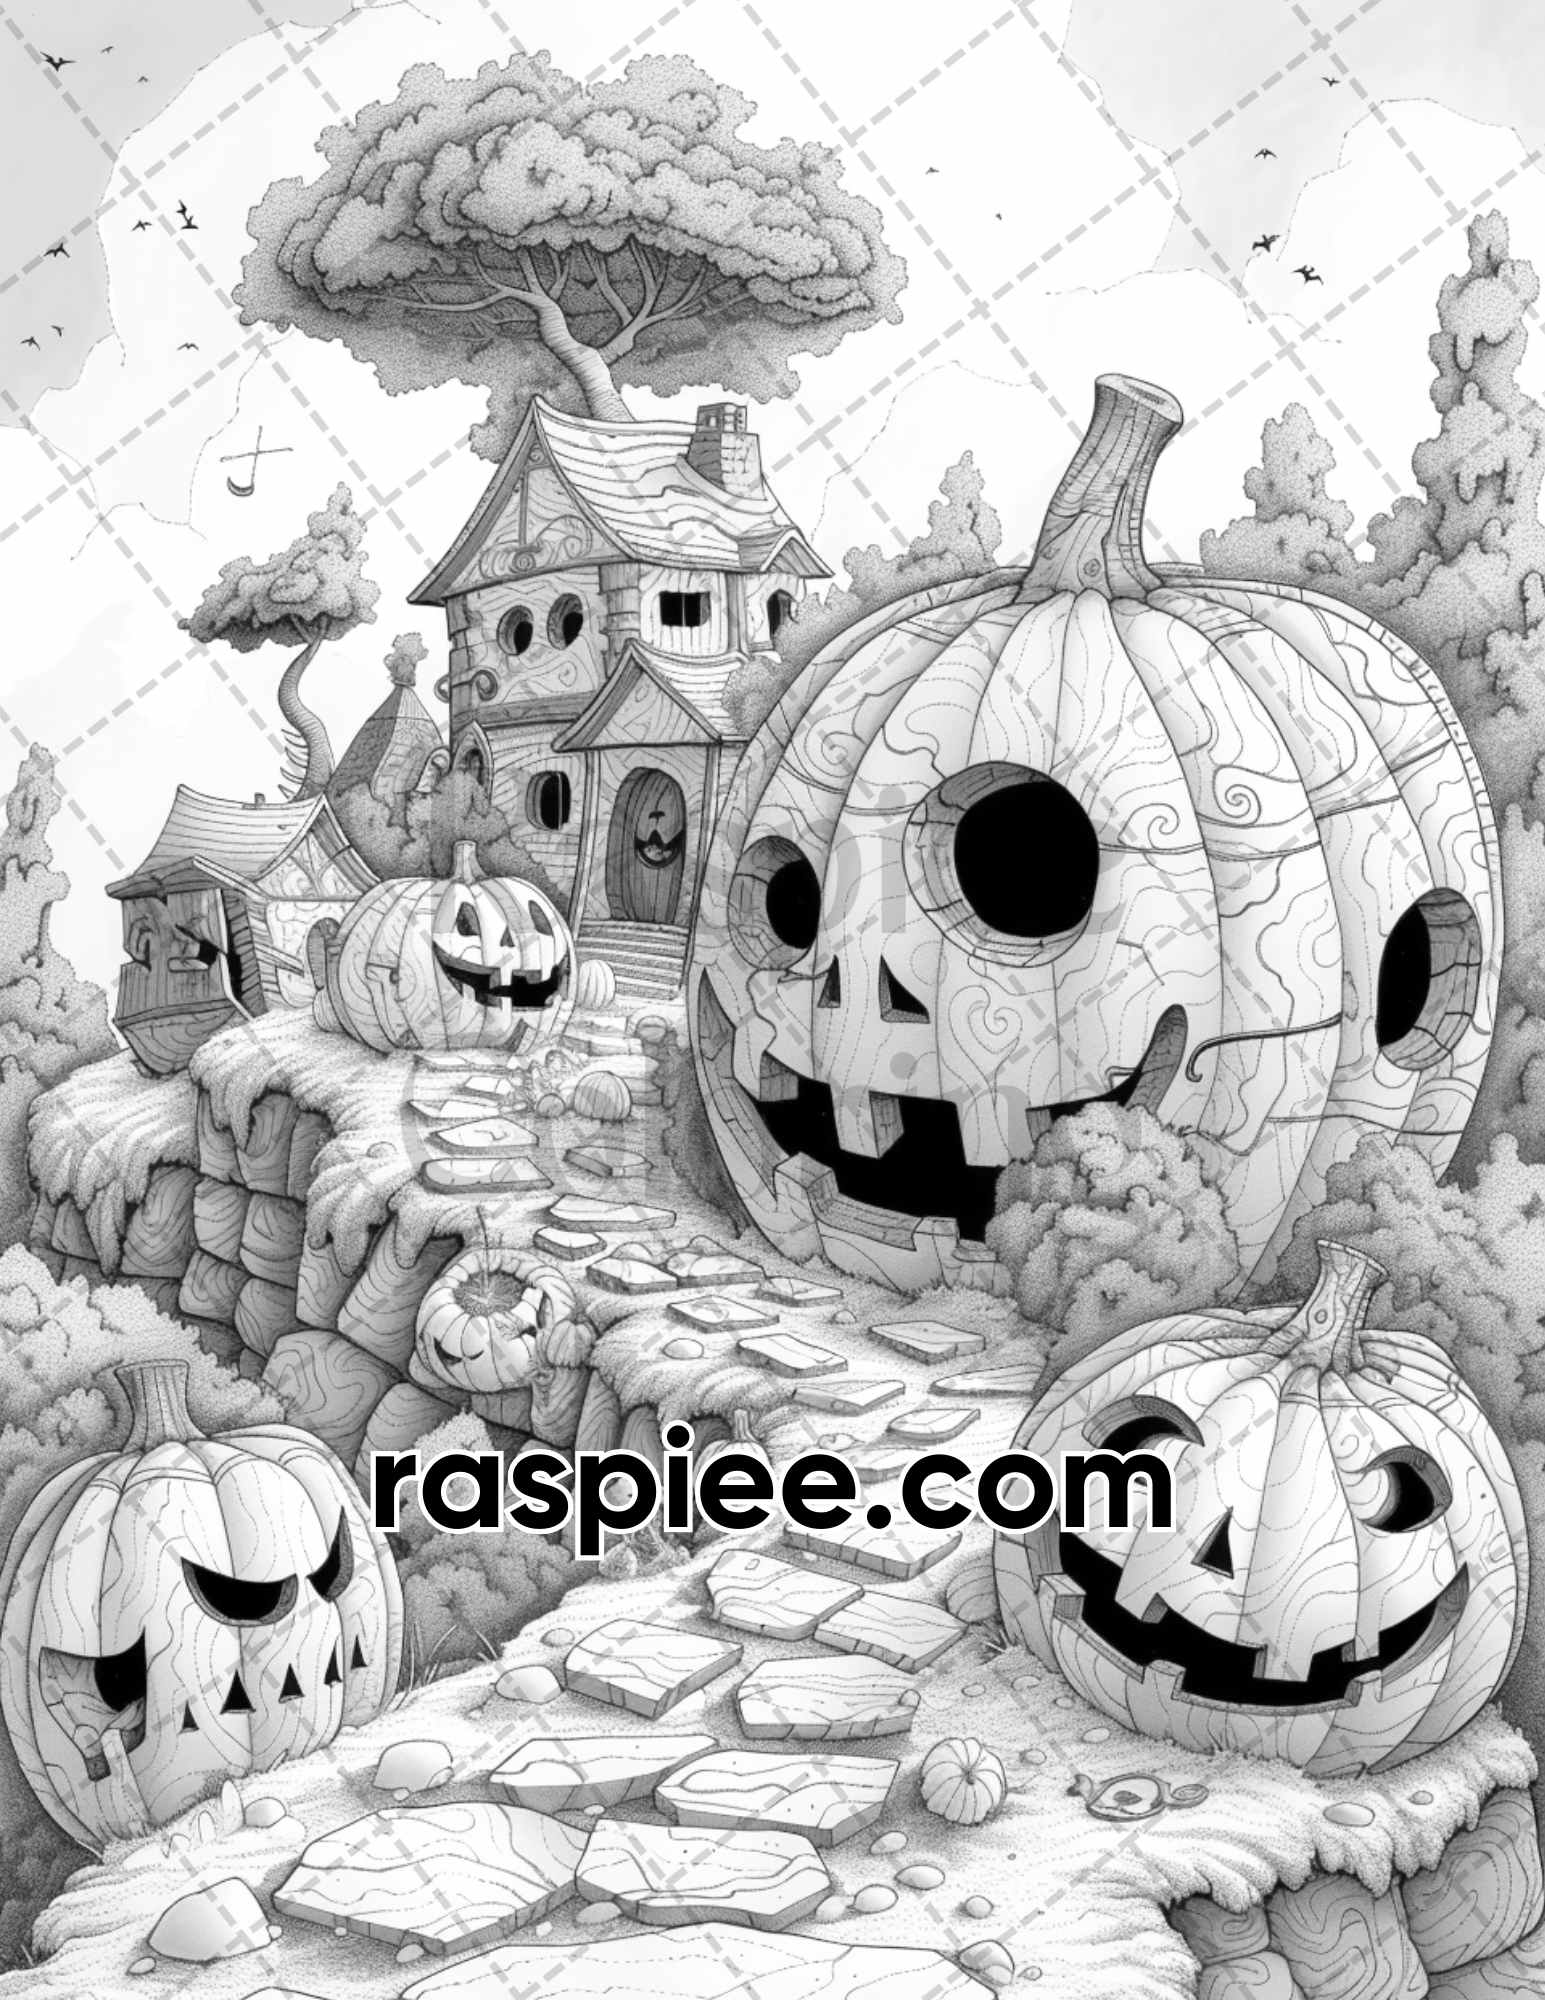 adult coloring pages, adult coloring sheets, adult coloring book pdf, adult coloring book printable, grayscale coloring pages, grayscale coloring books, fantasy pumpkin village coloring pages for adults, fantasy pumpkin village coloring book, grayscale illustration